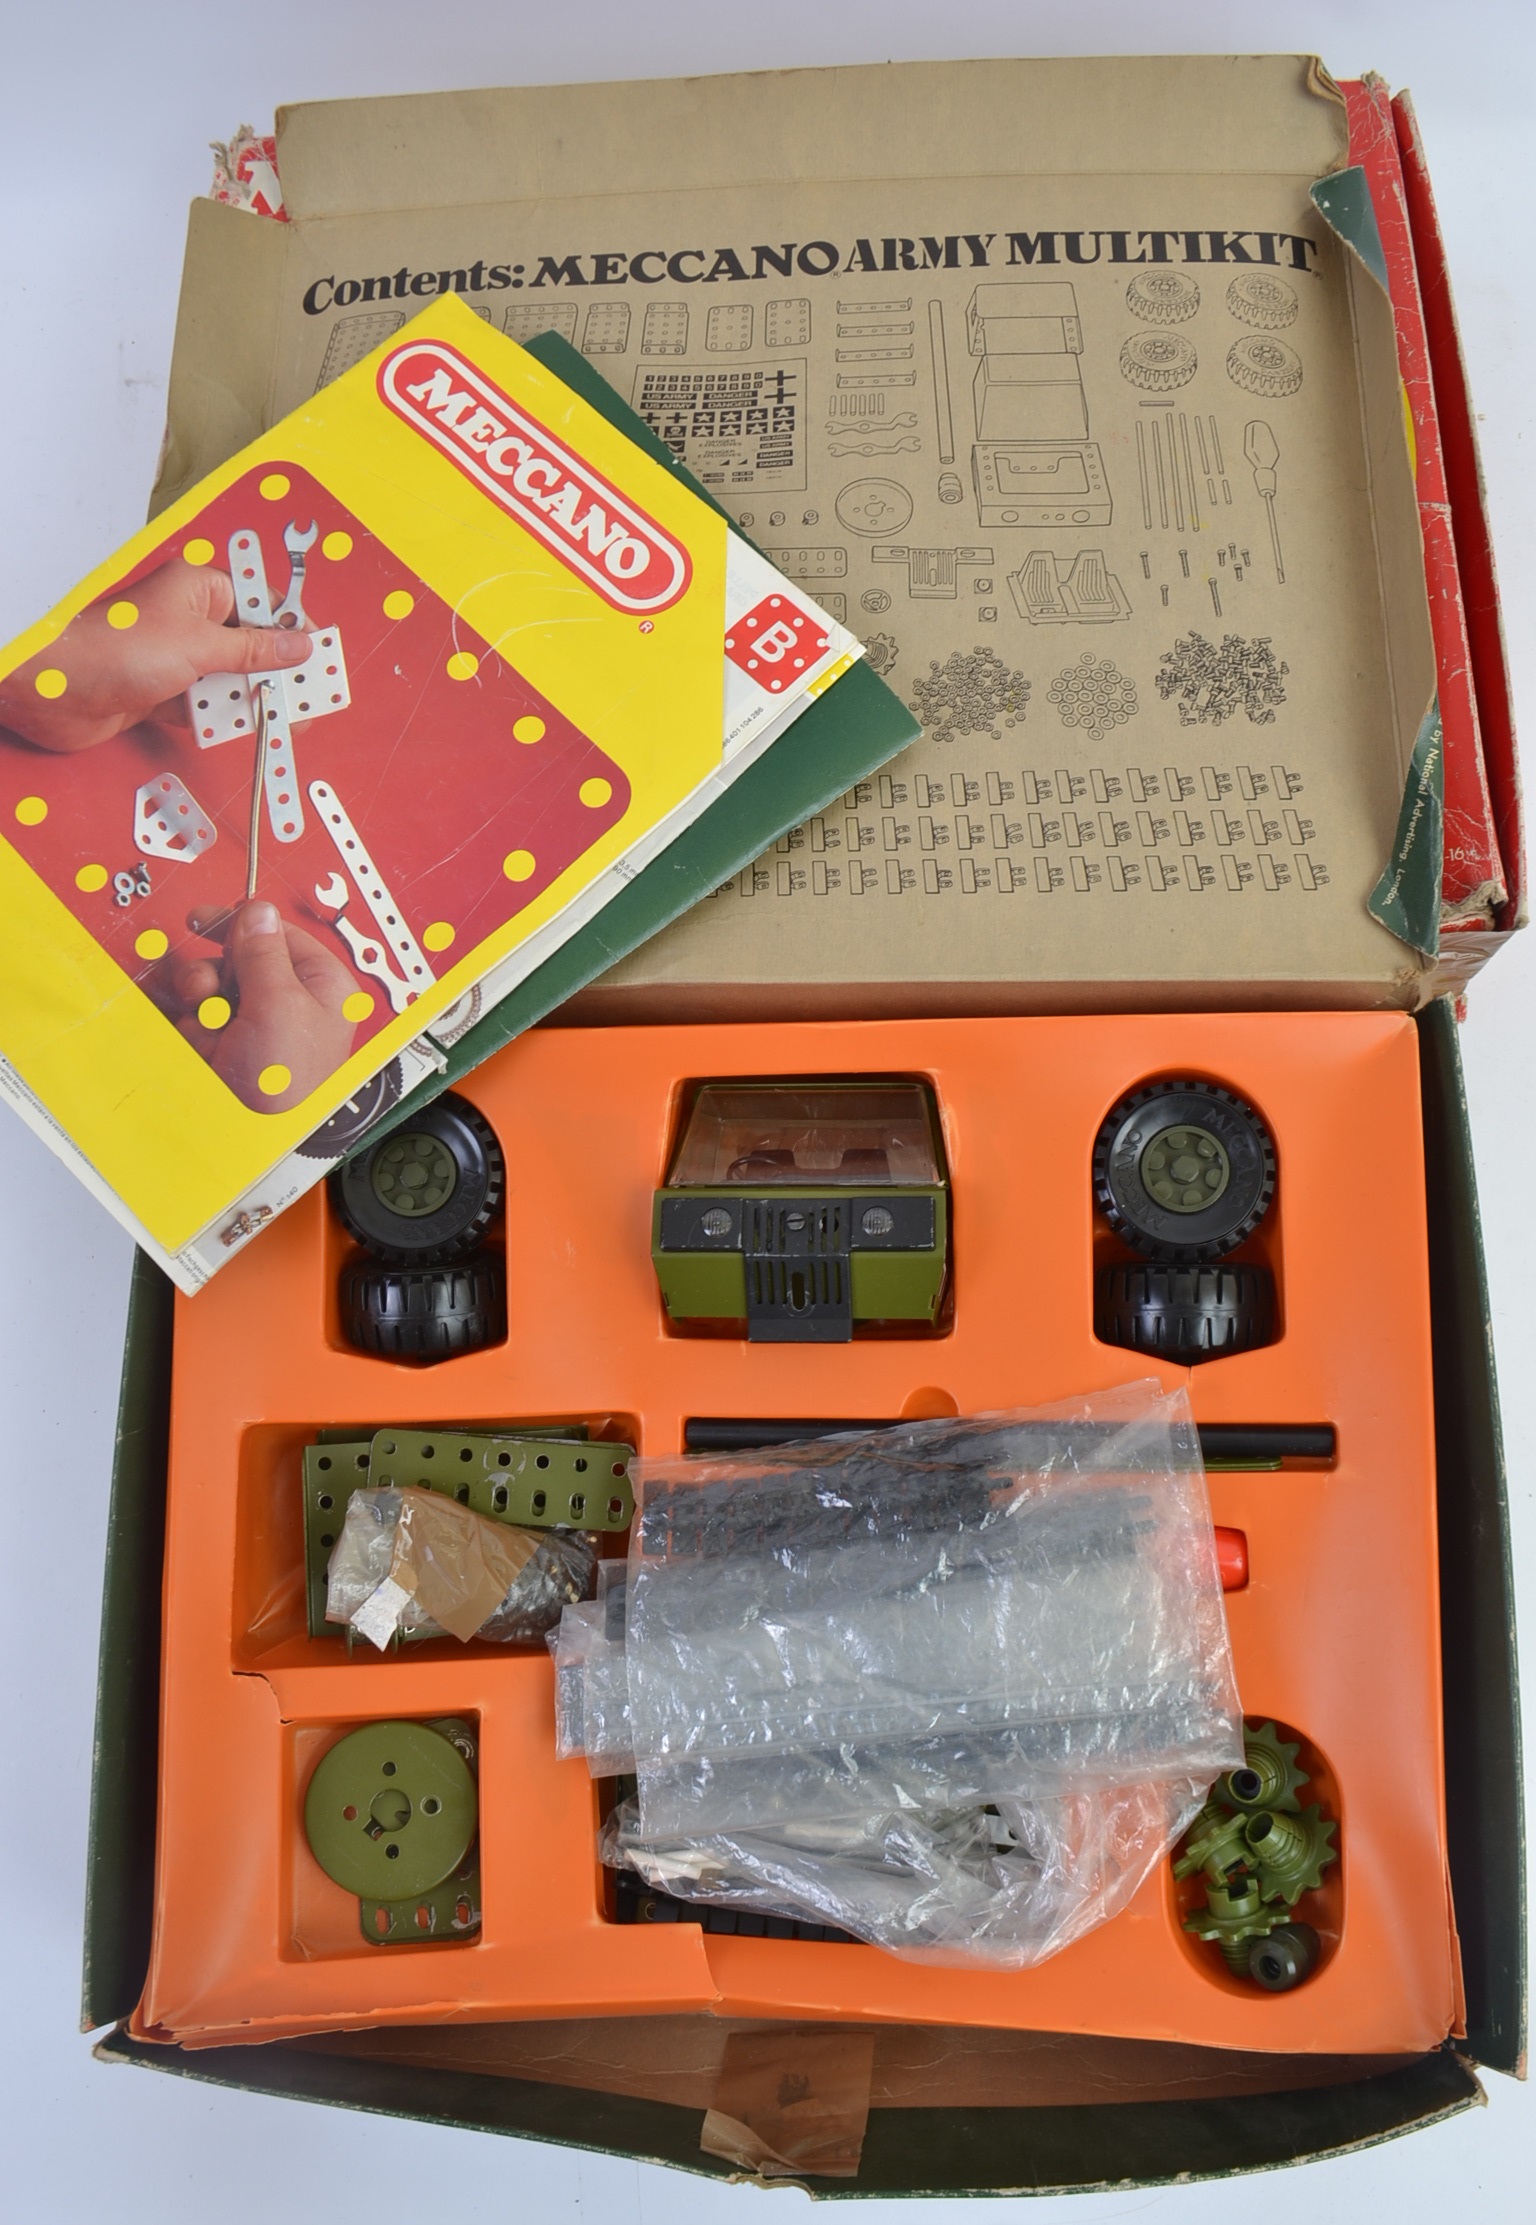 MECCANO; Two vintage Meccano building playsets - Army Multikit and Super Highway Multikit. - Image 2 of 3